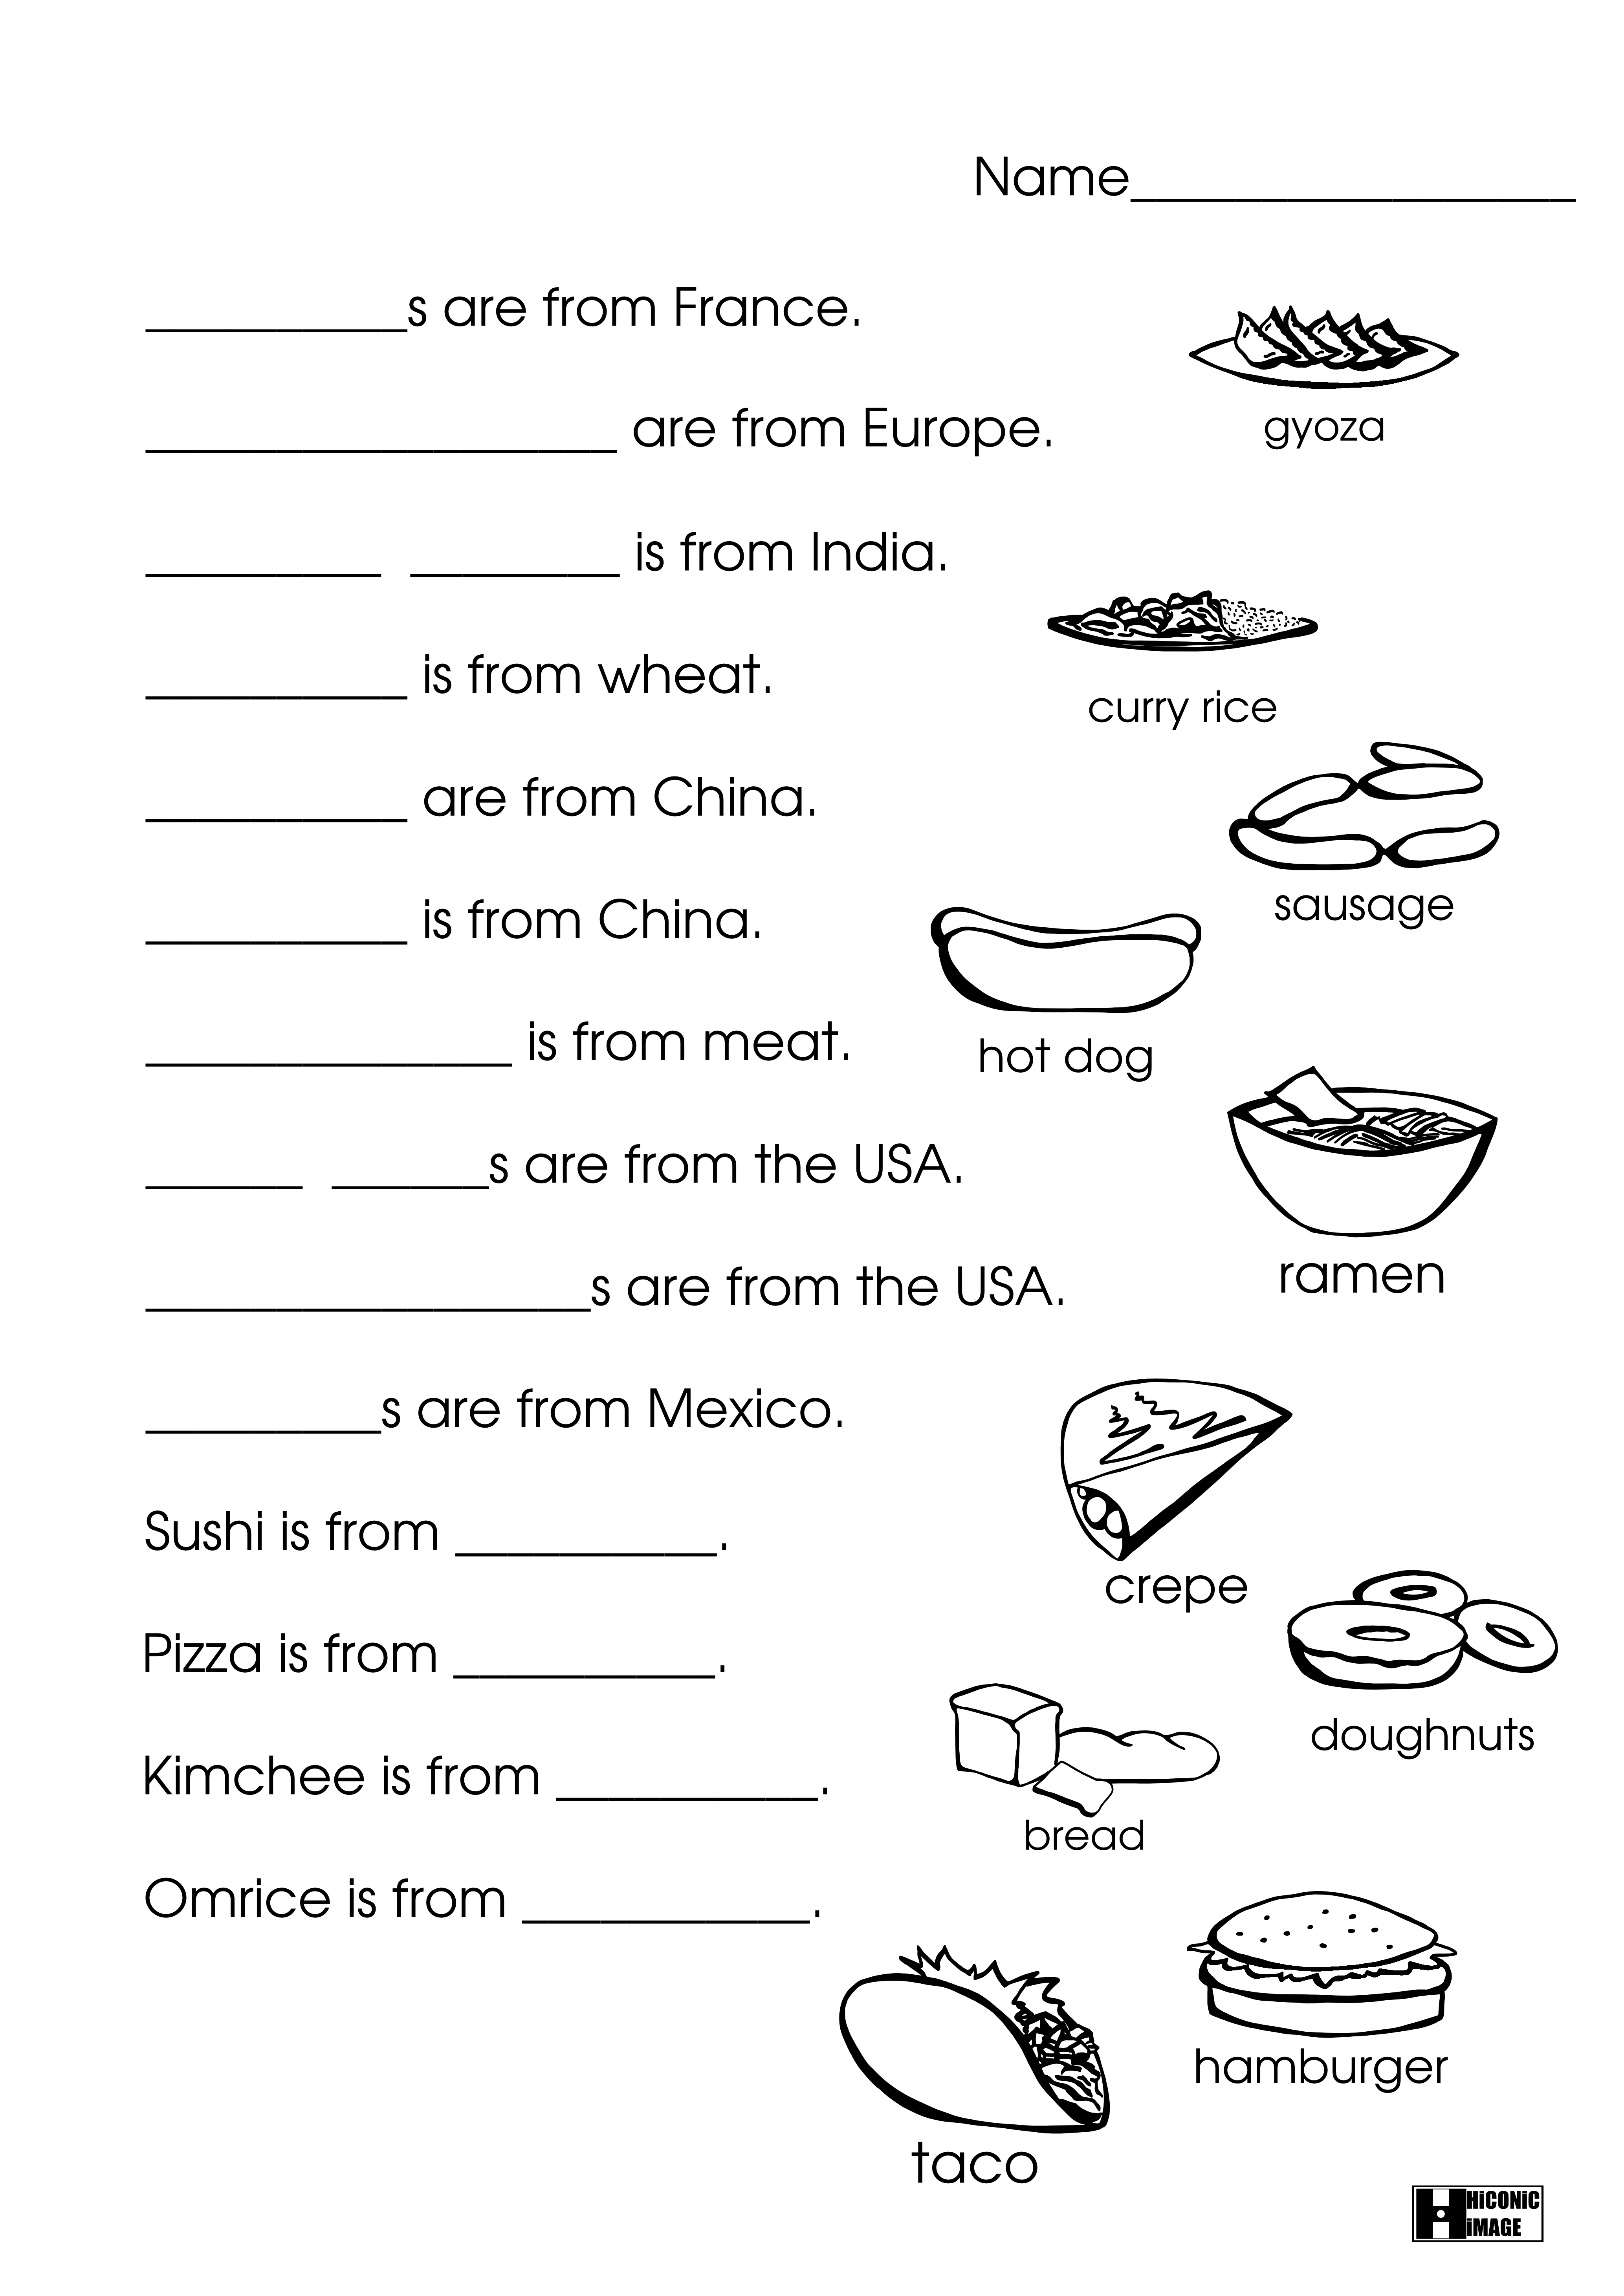 4-best-images-of-japan-activities-printables-worksheets-free-paper-dolls-from-around-the-world